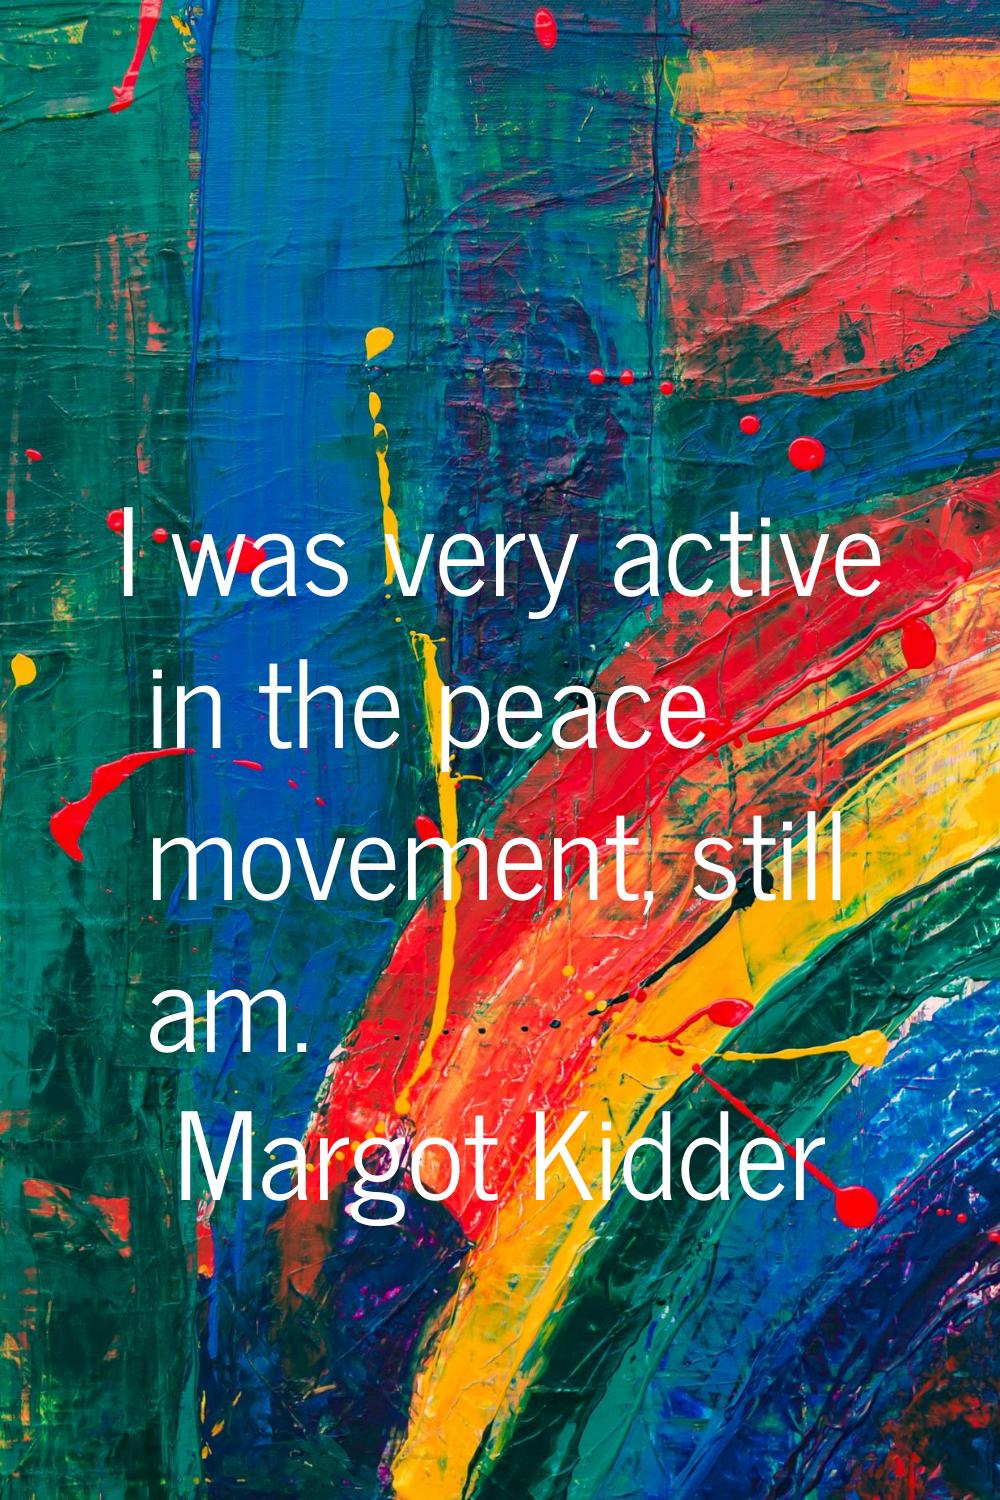 I was very active in the peace movement, still am.